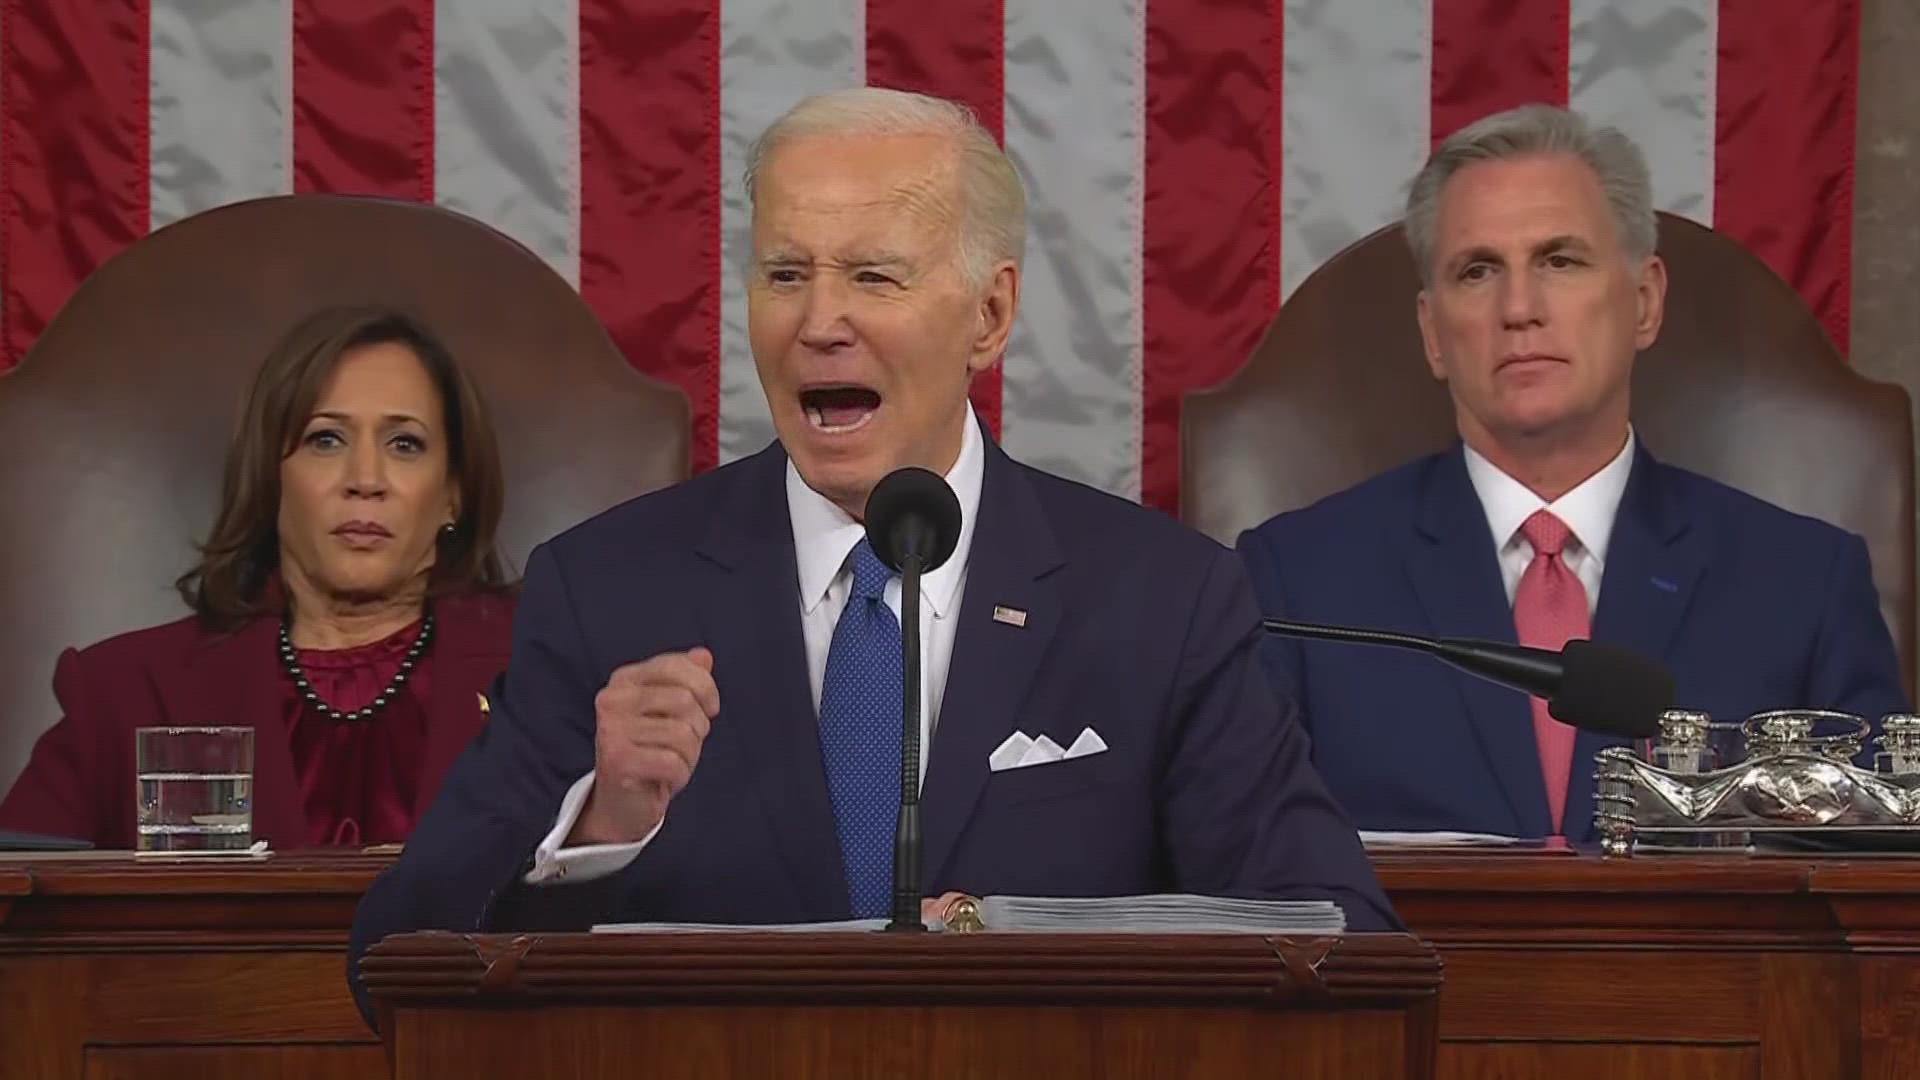 State of the Union: What the 1870, crayon lapel pins mean